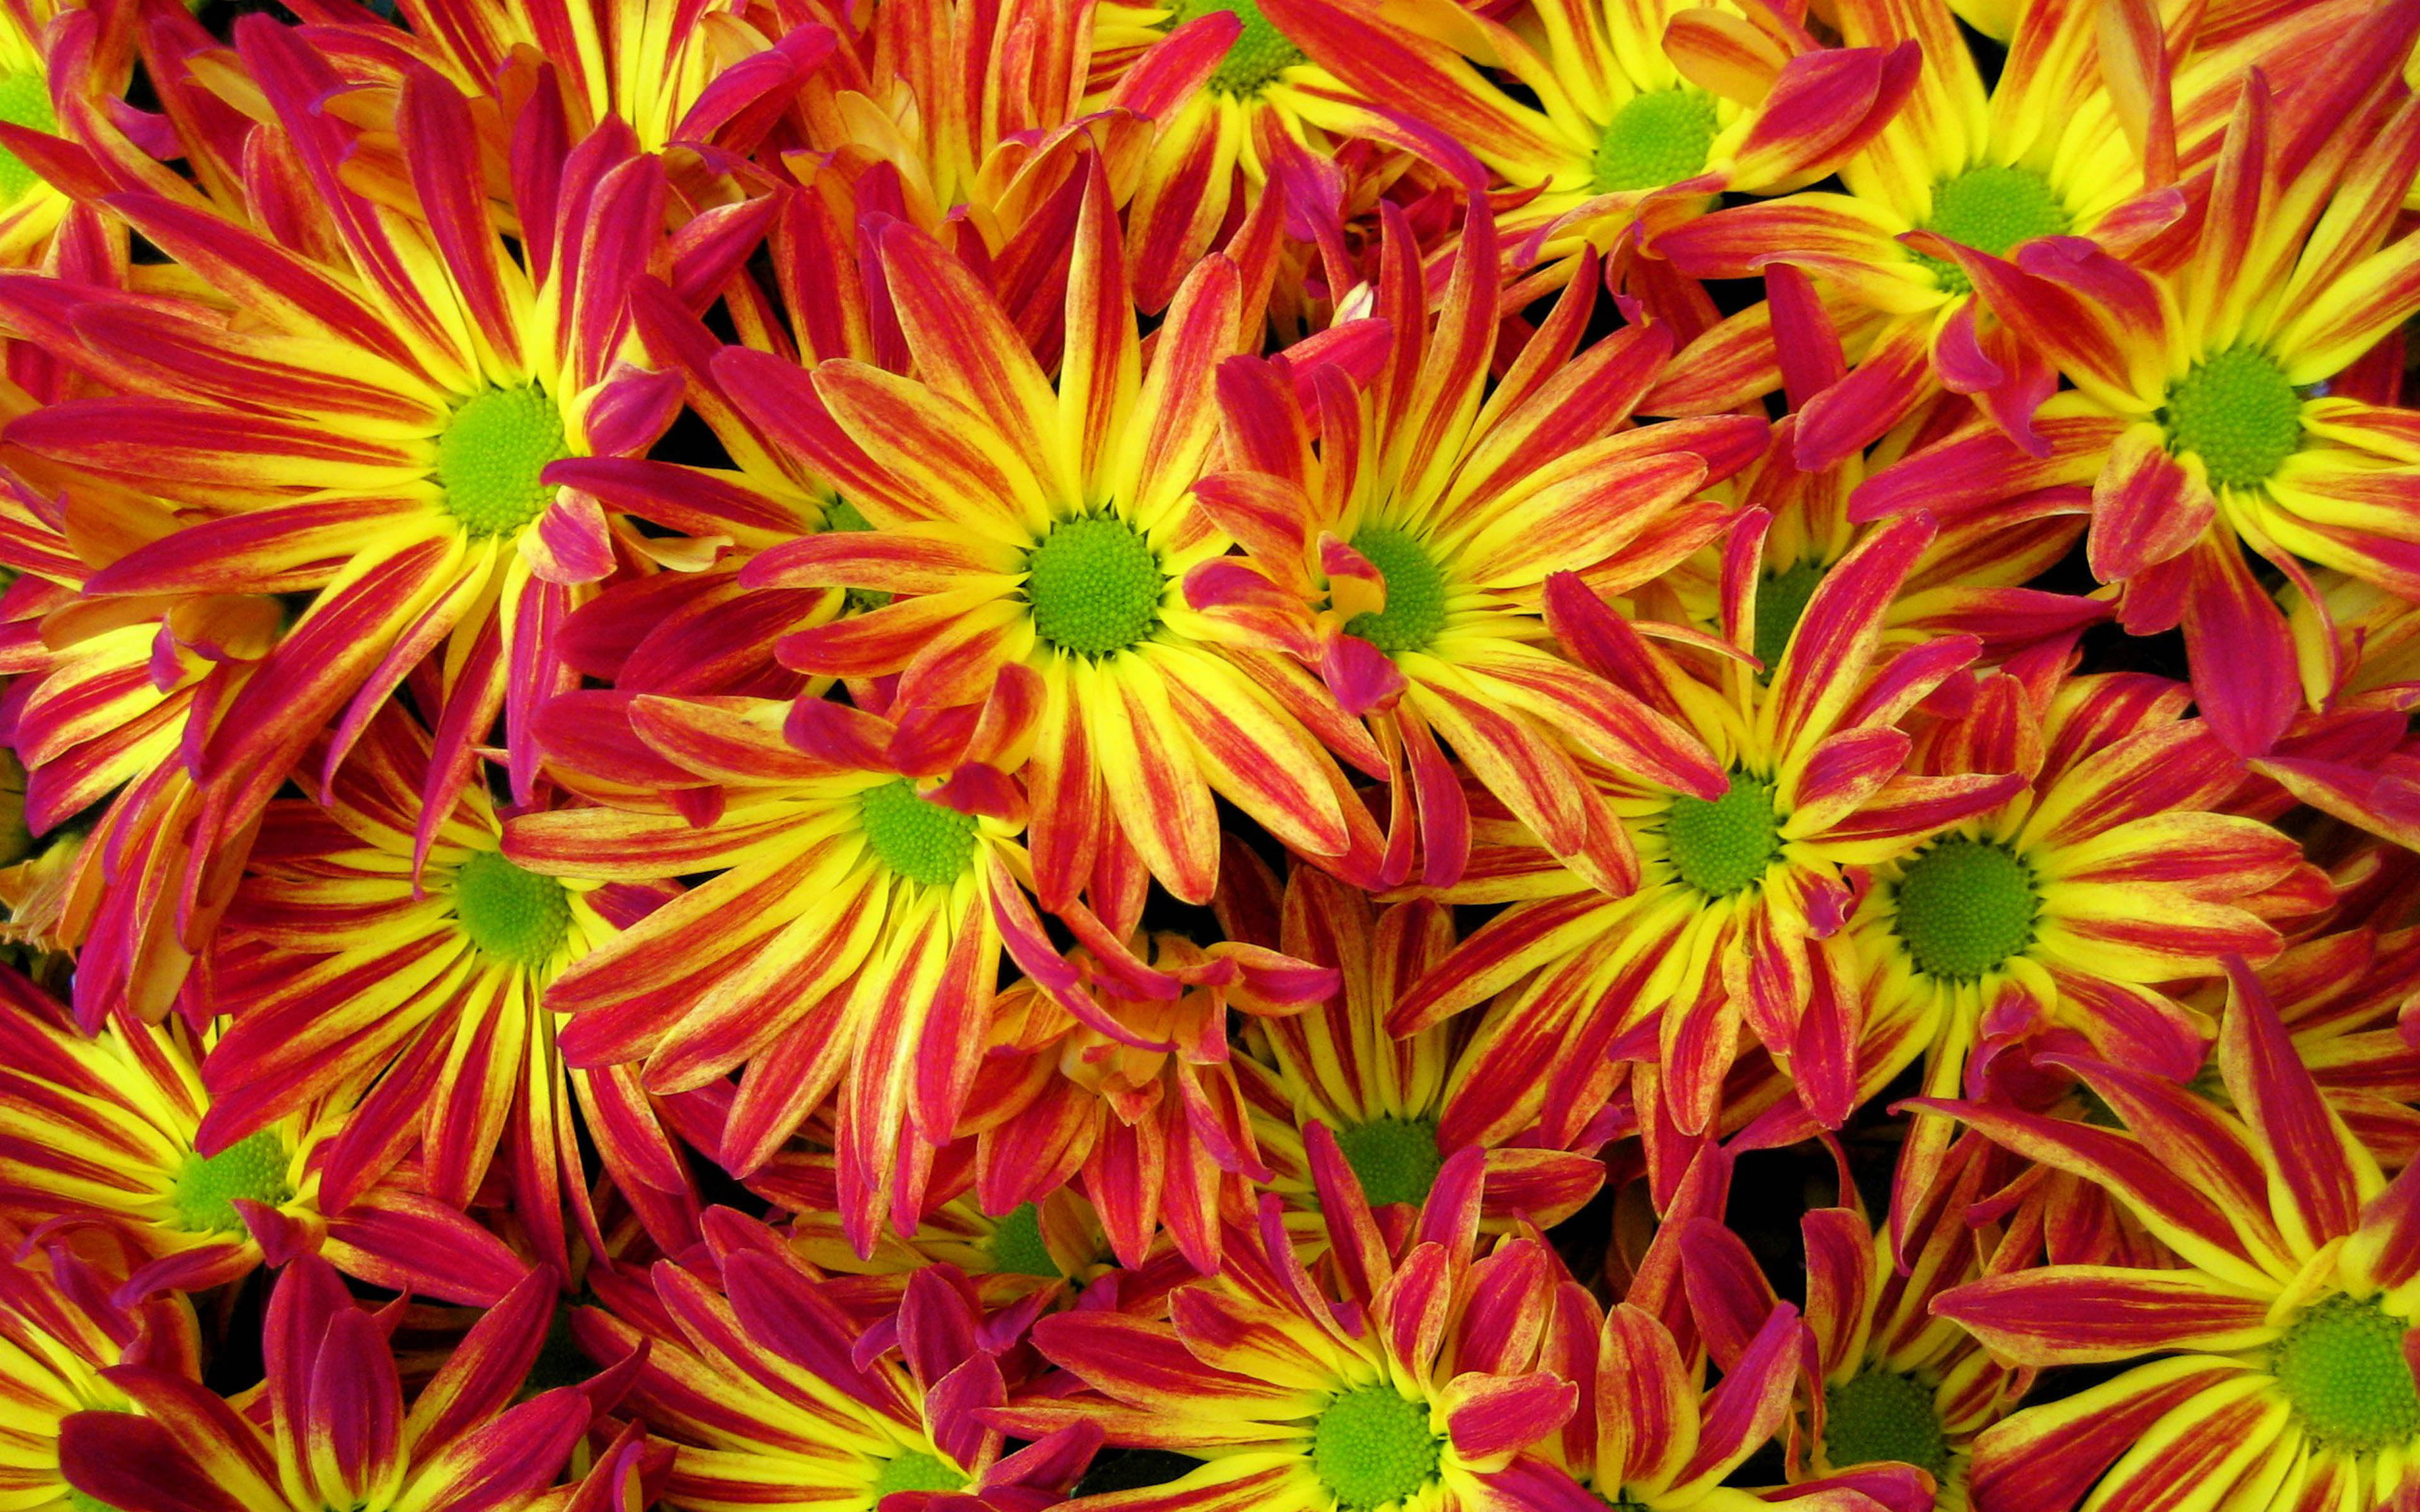 Beautiful Flowers Red And Yellow Chrysanthemum My Favorite Flowers Garden Ultra Hd 4k Resolution Wallpapers 3840×2400